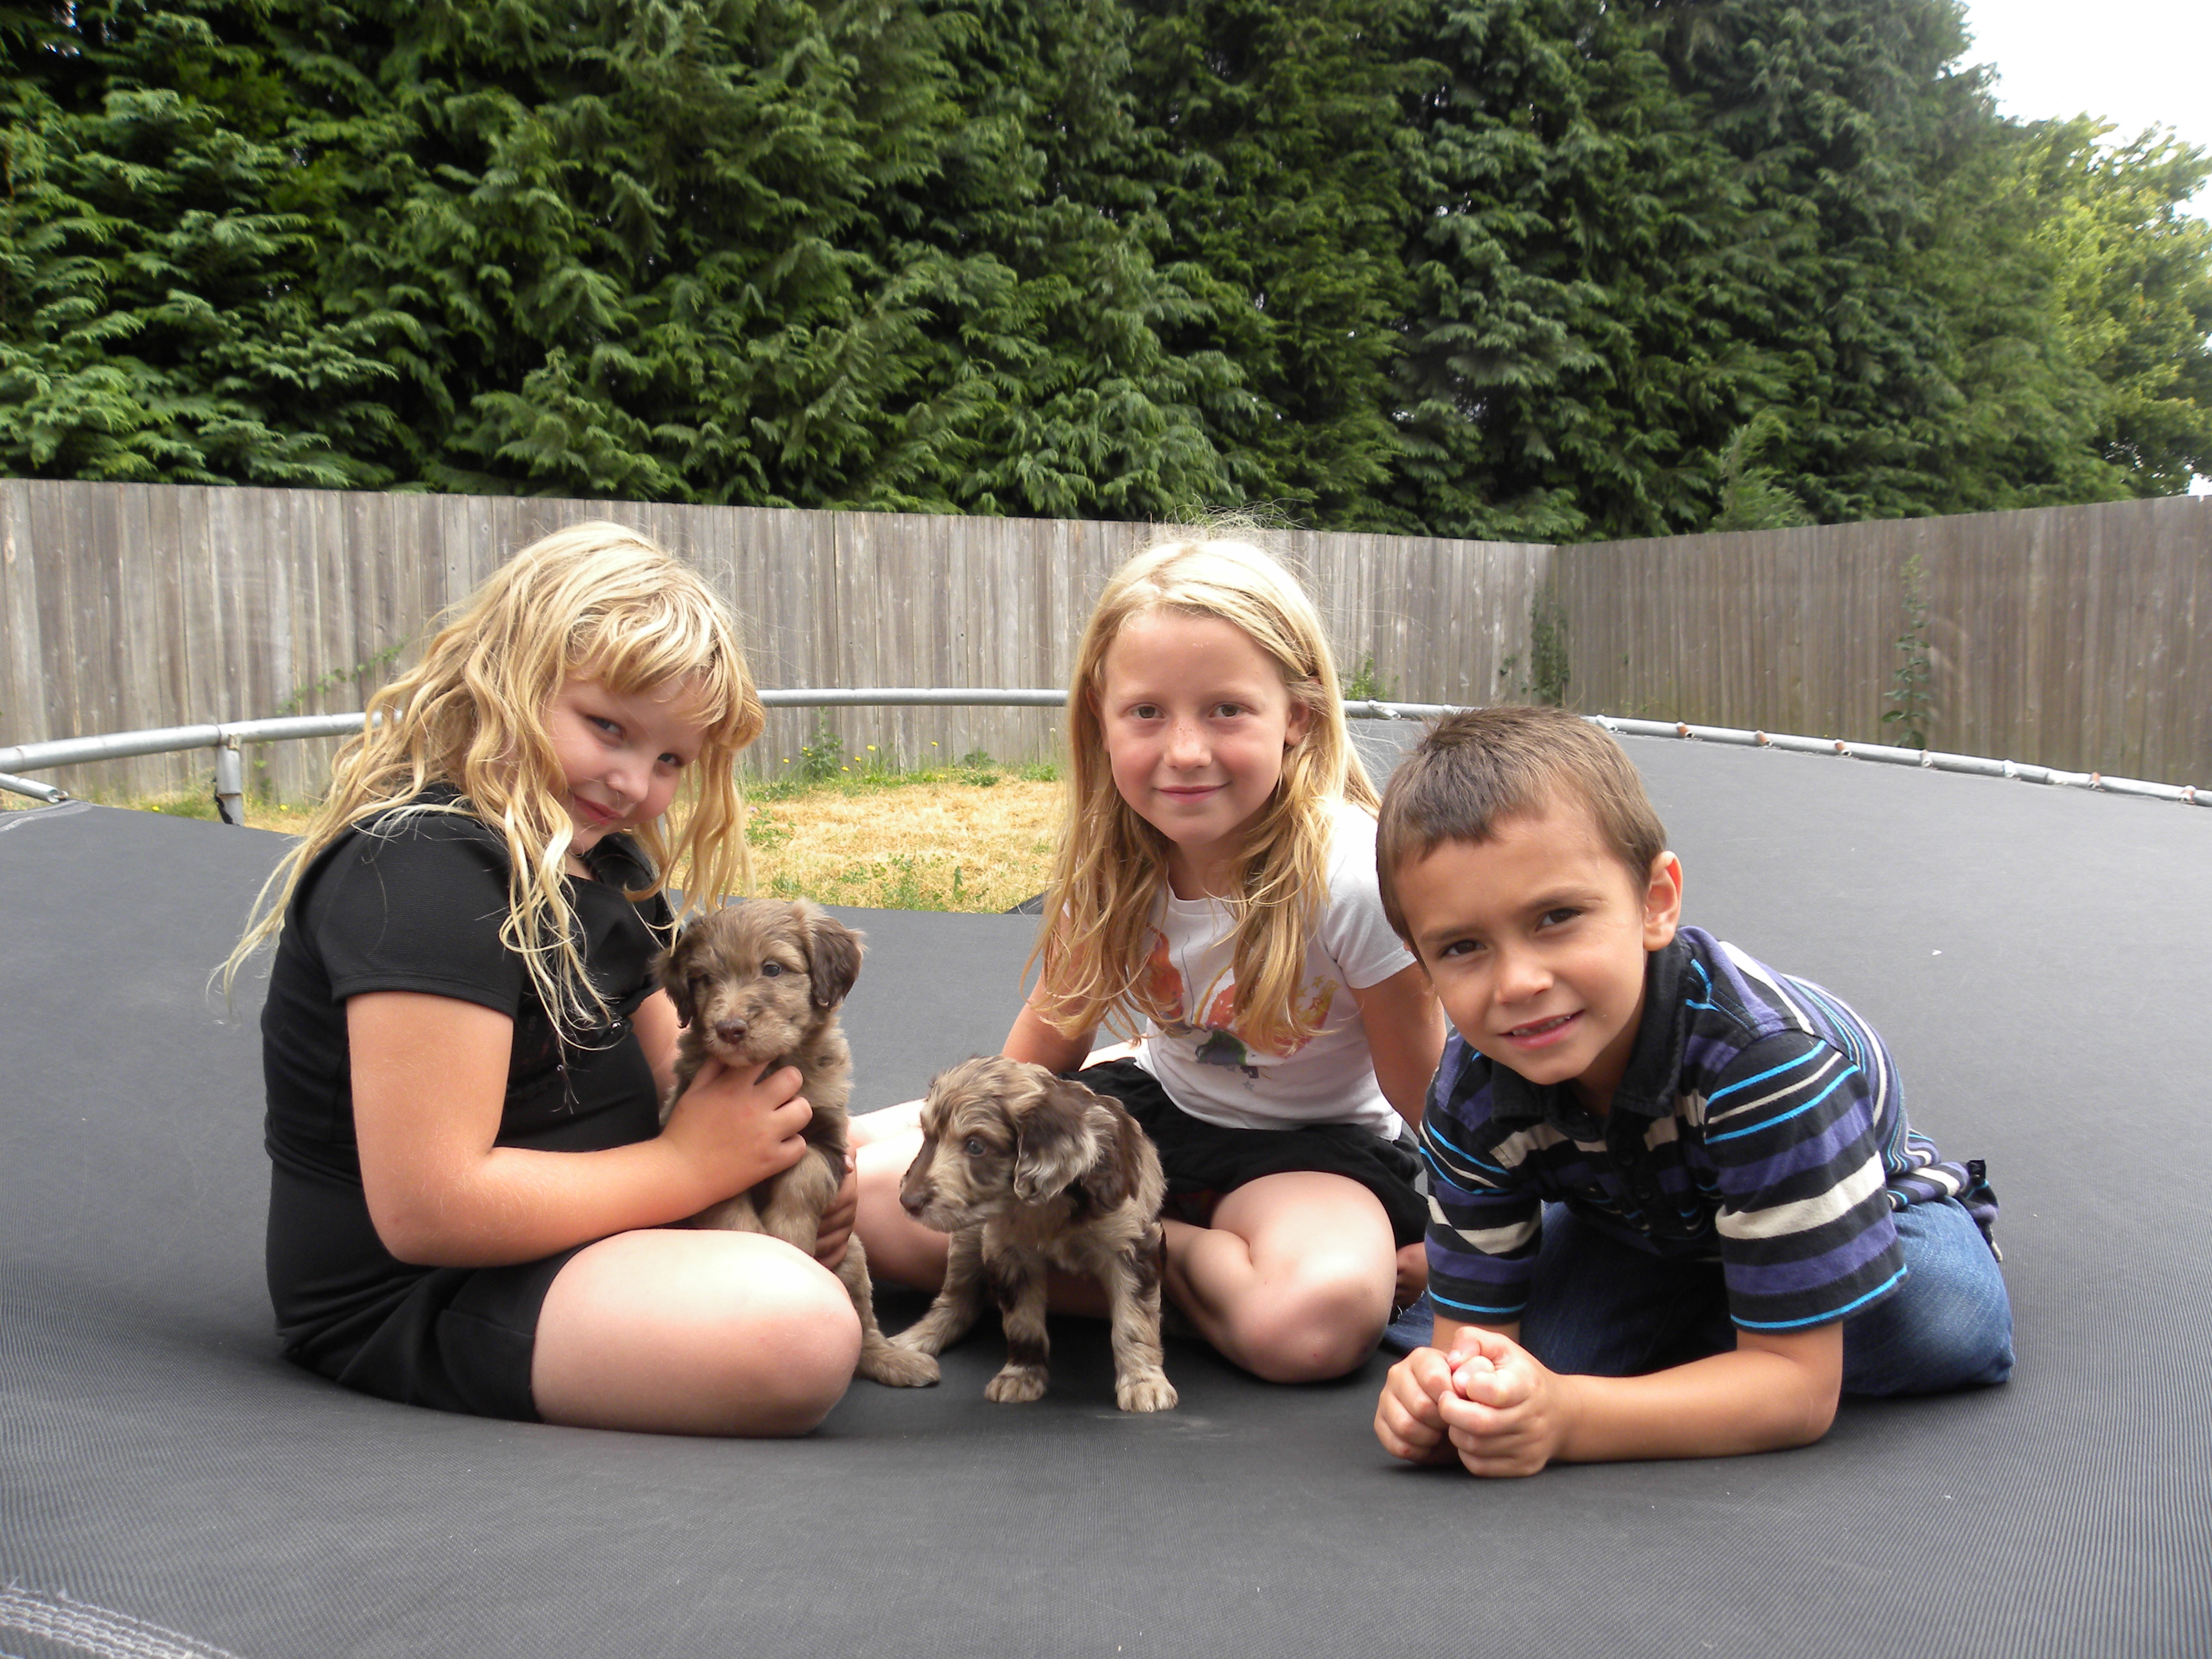 Flower and Sammy on the Trampoline with the kids - F1 Aussiedoodles 5 weeks